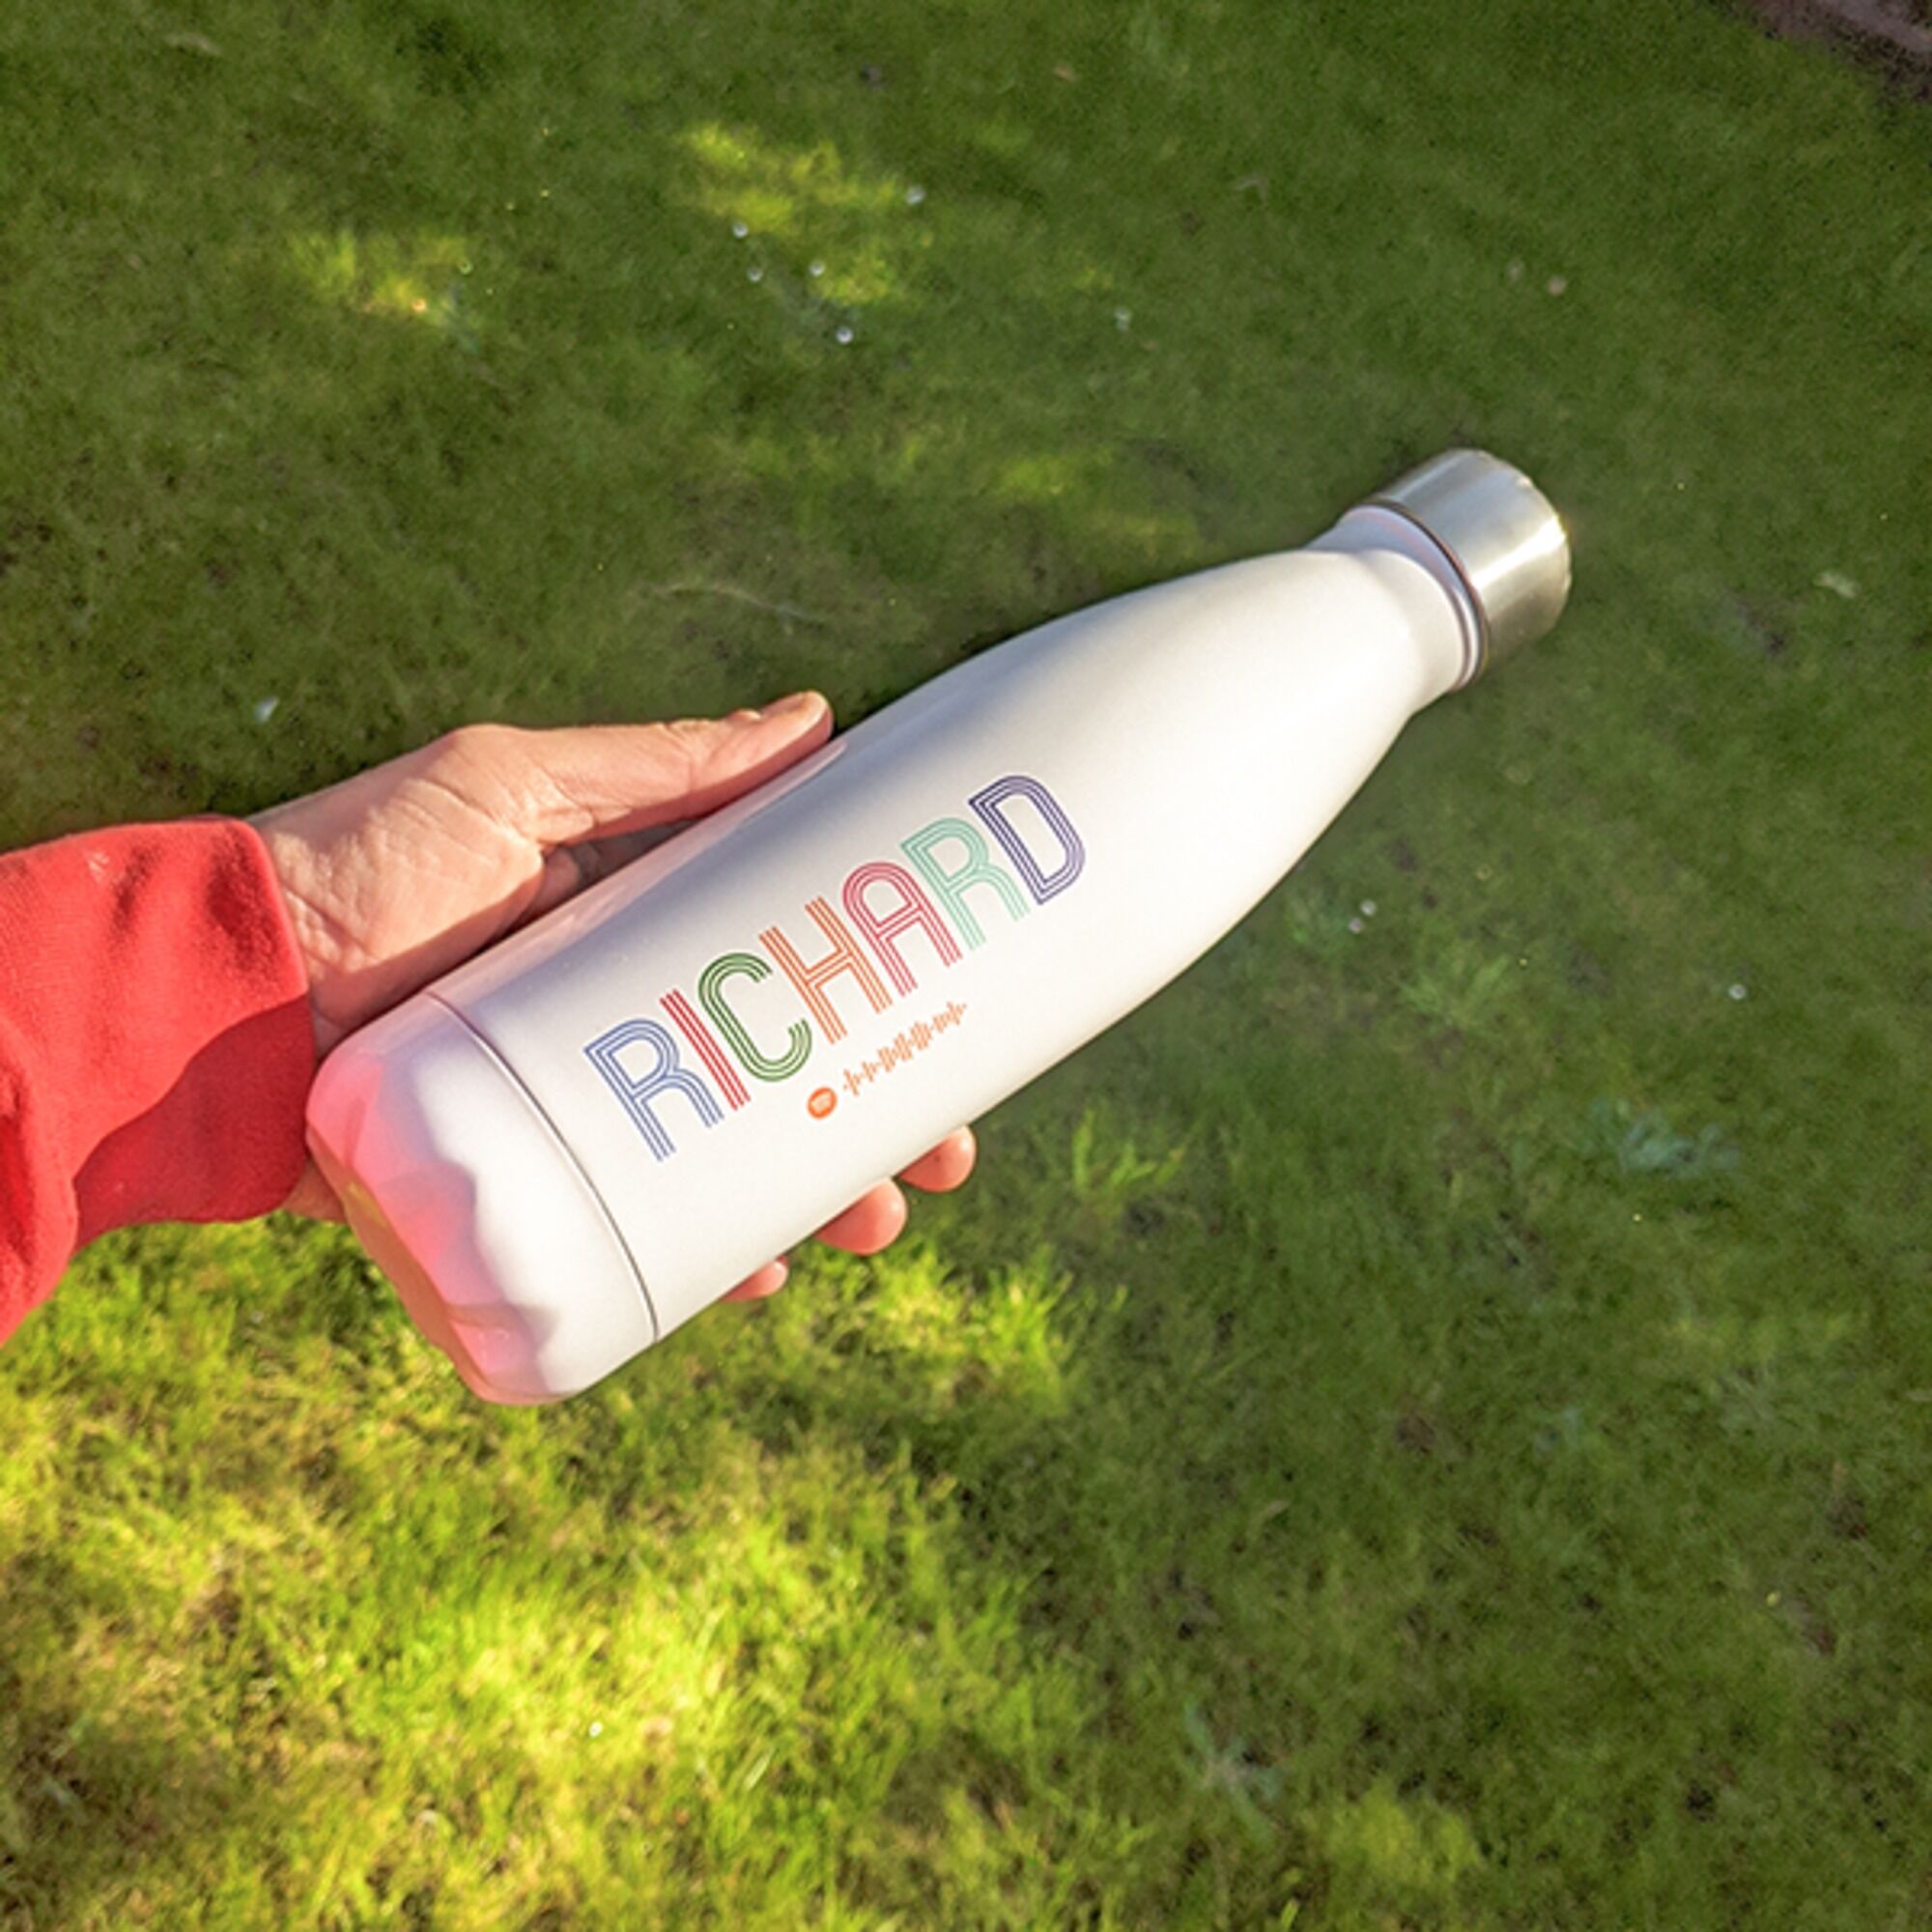 Personalised Water Bottle With Spotify Workout Playlist